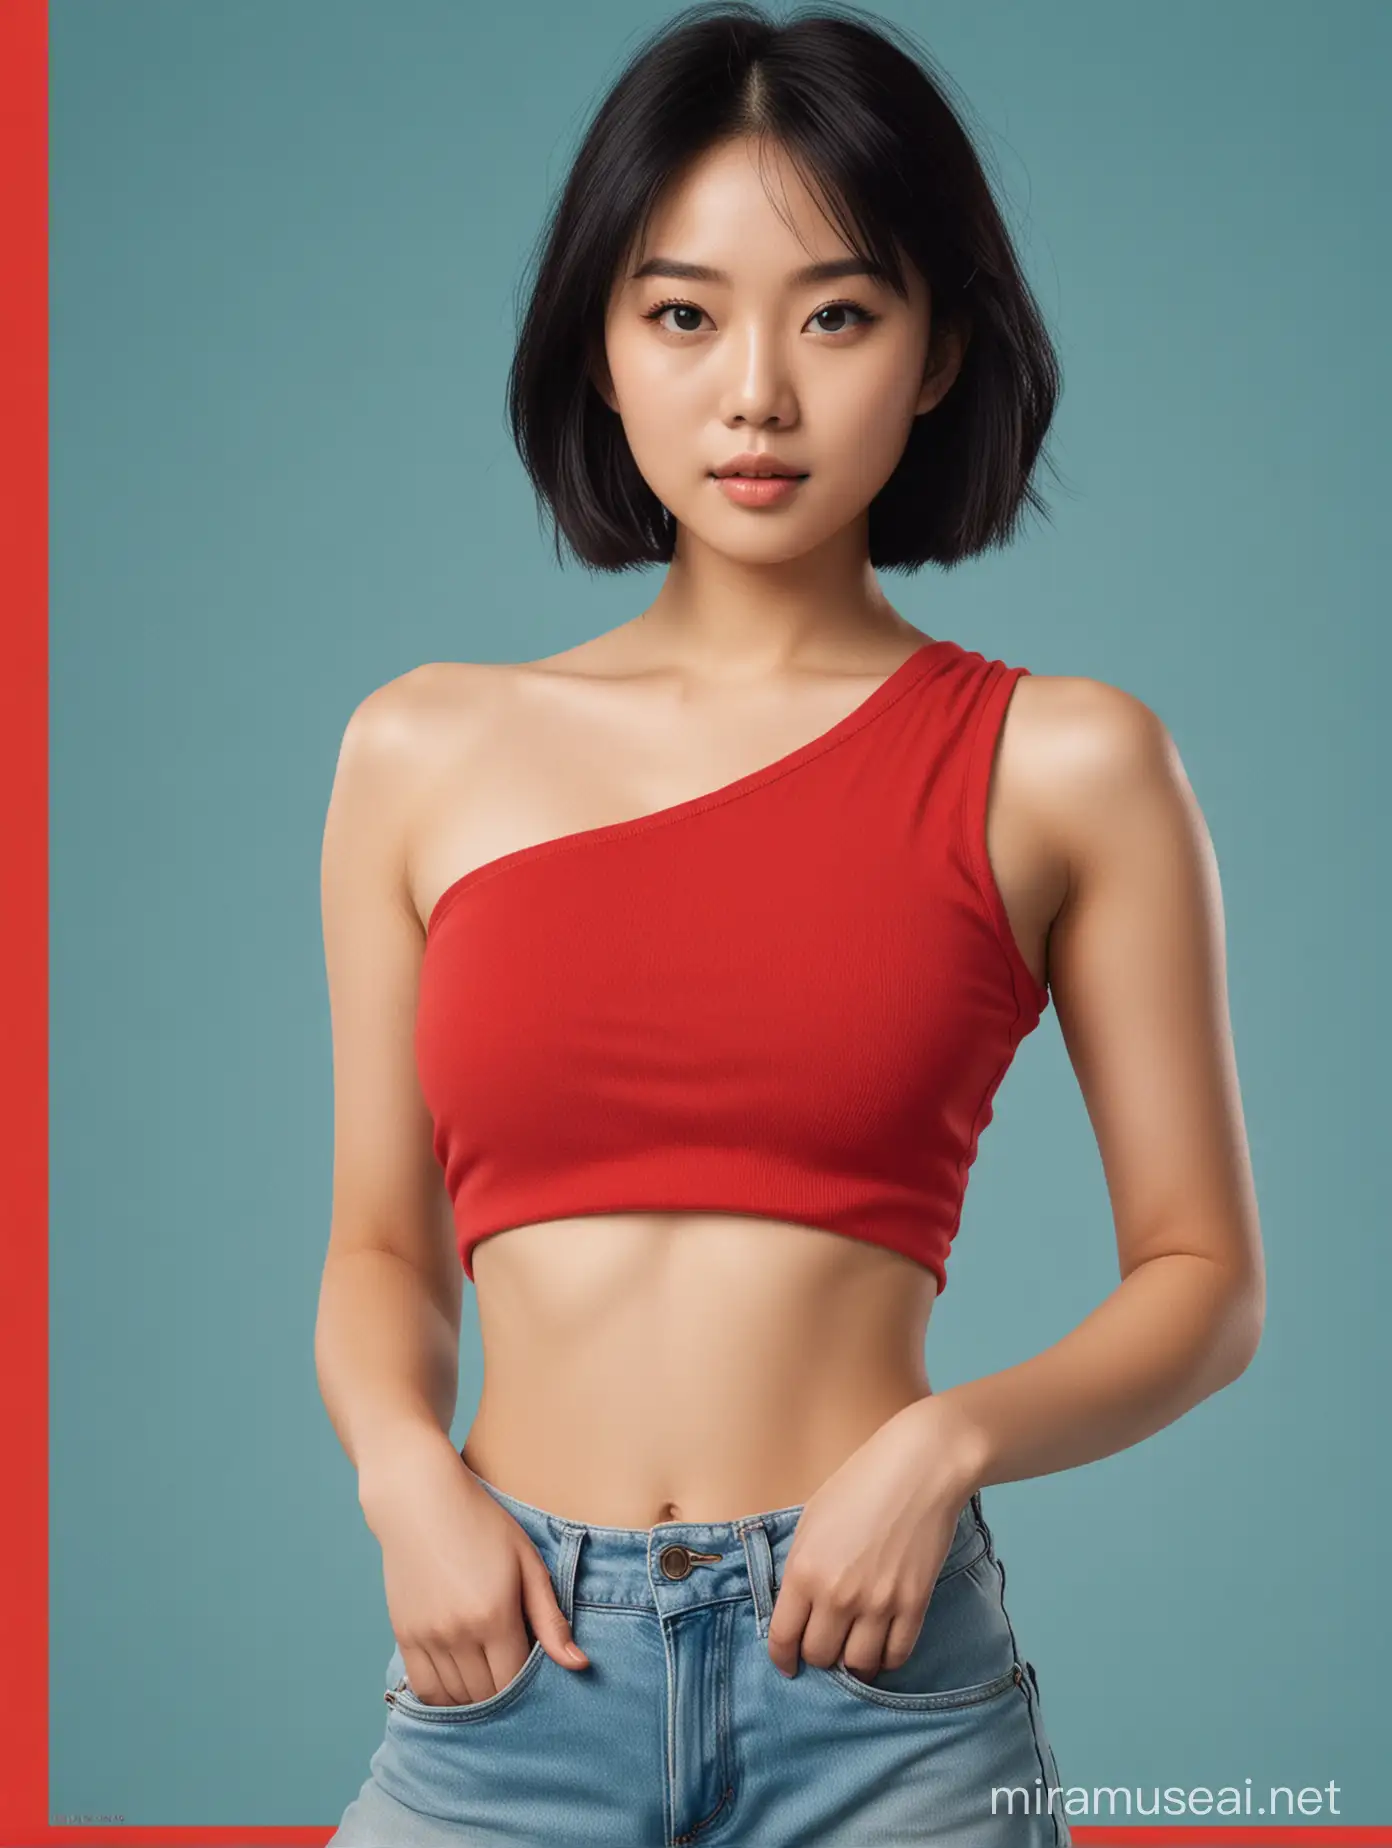 Stylish Asian Girl in Red Crop Top and Baggy Jeans Movie Poster Concept